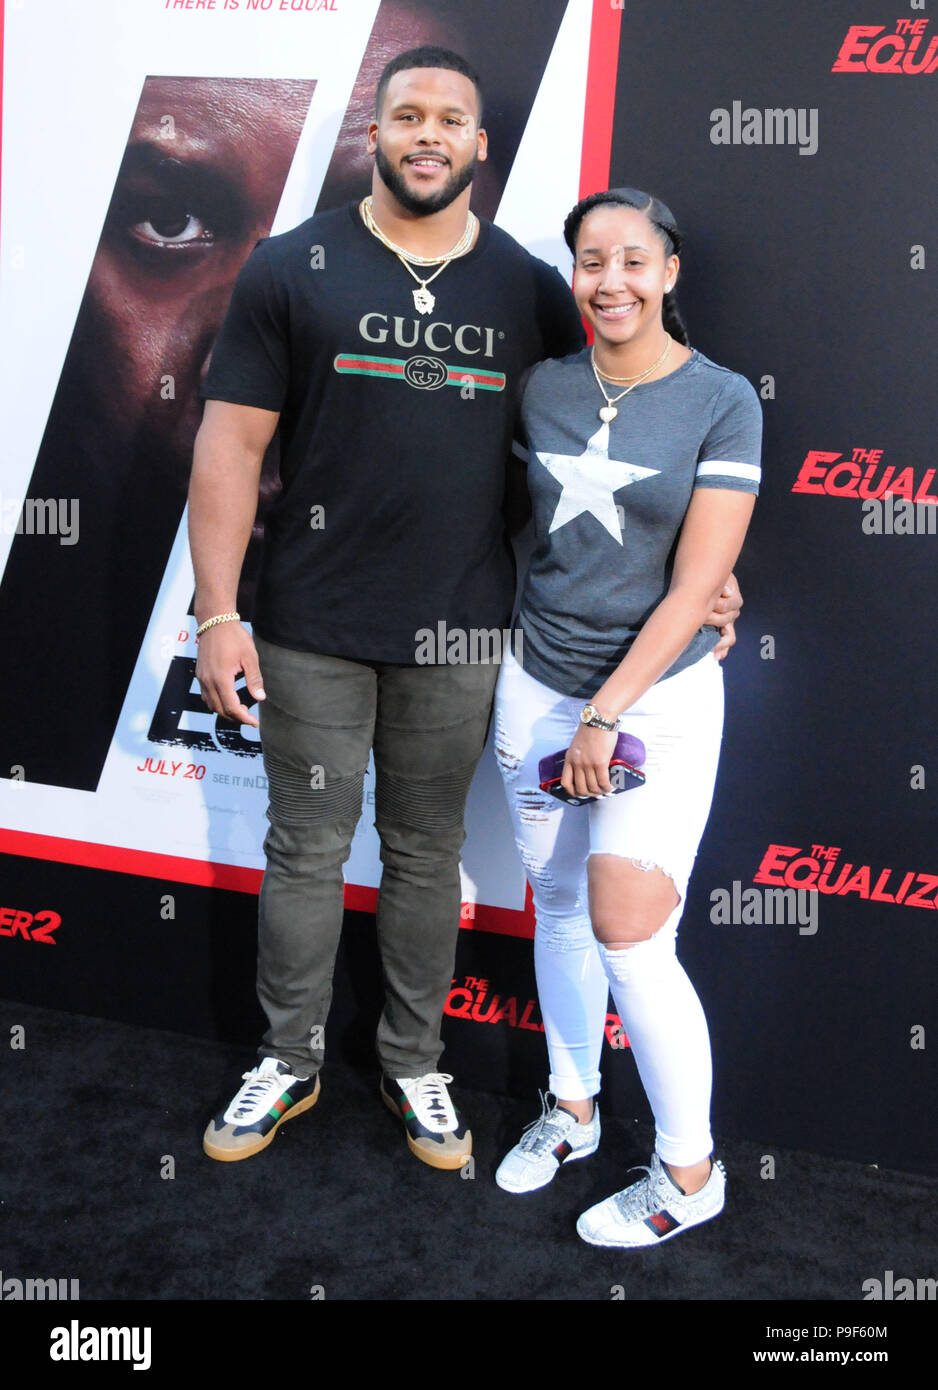 Los Angeles, California, USA. 17th July, 2018. American Football player Aaron Donald attends Columbia Picture's World Premiere of 'Equalizer 2' at TCL Chinese Theatre on July 17, 2018 in Hollywood, California. Photo by Barry King/Alamy Live News Stock Photo